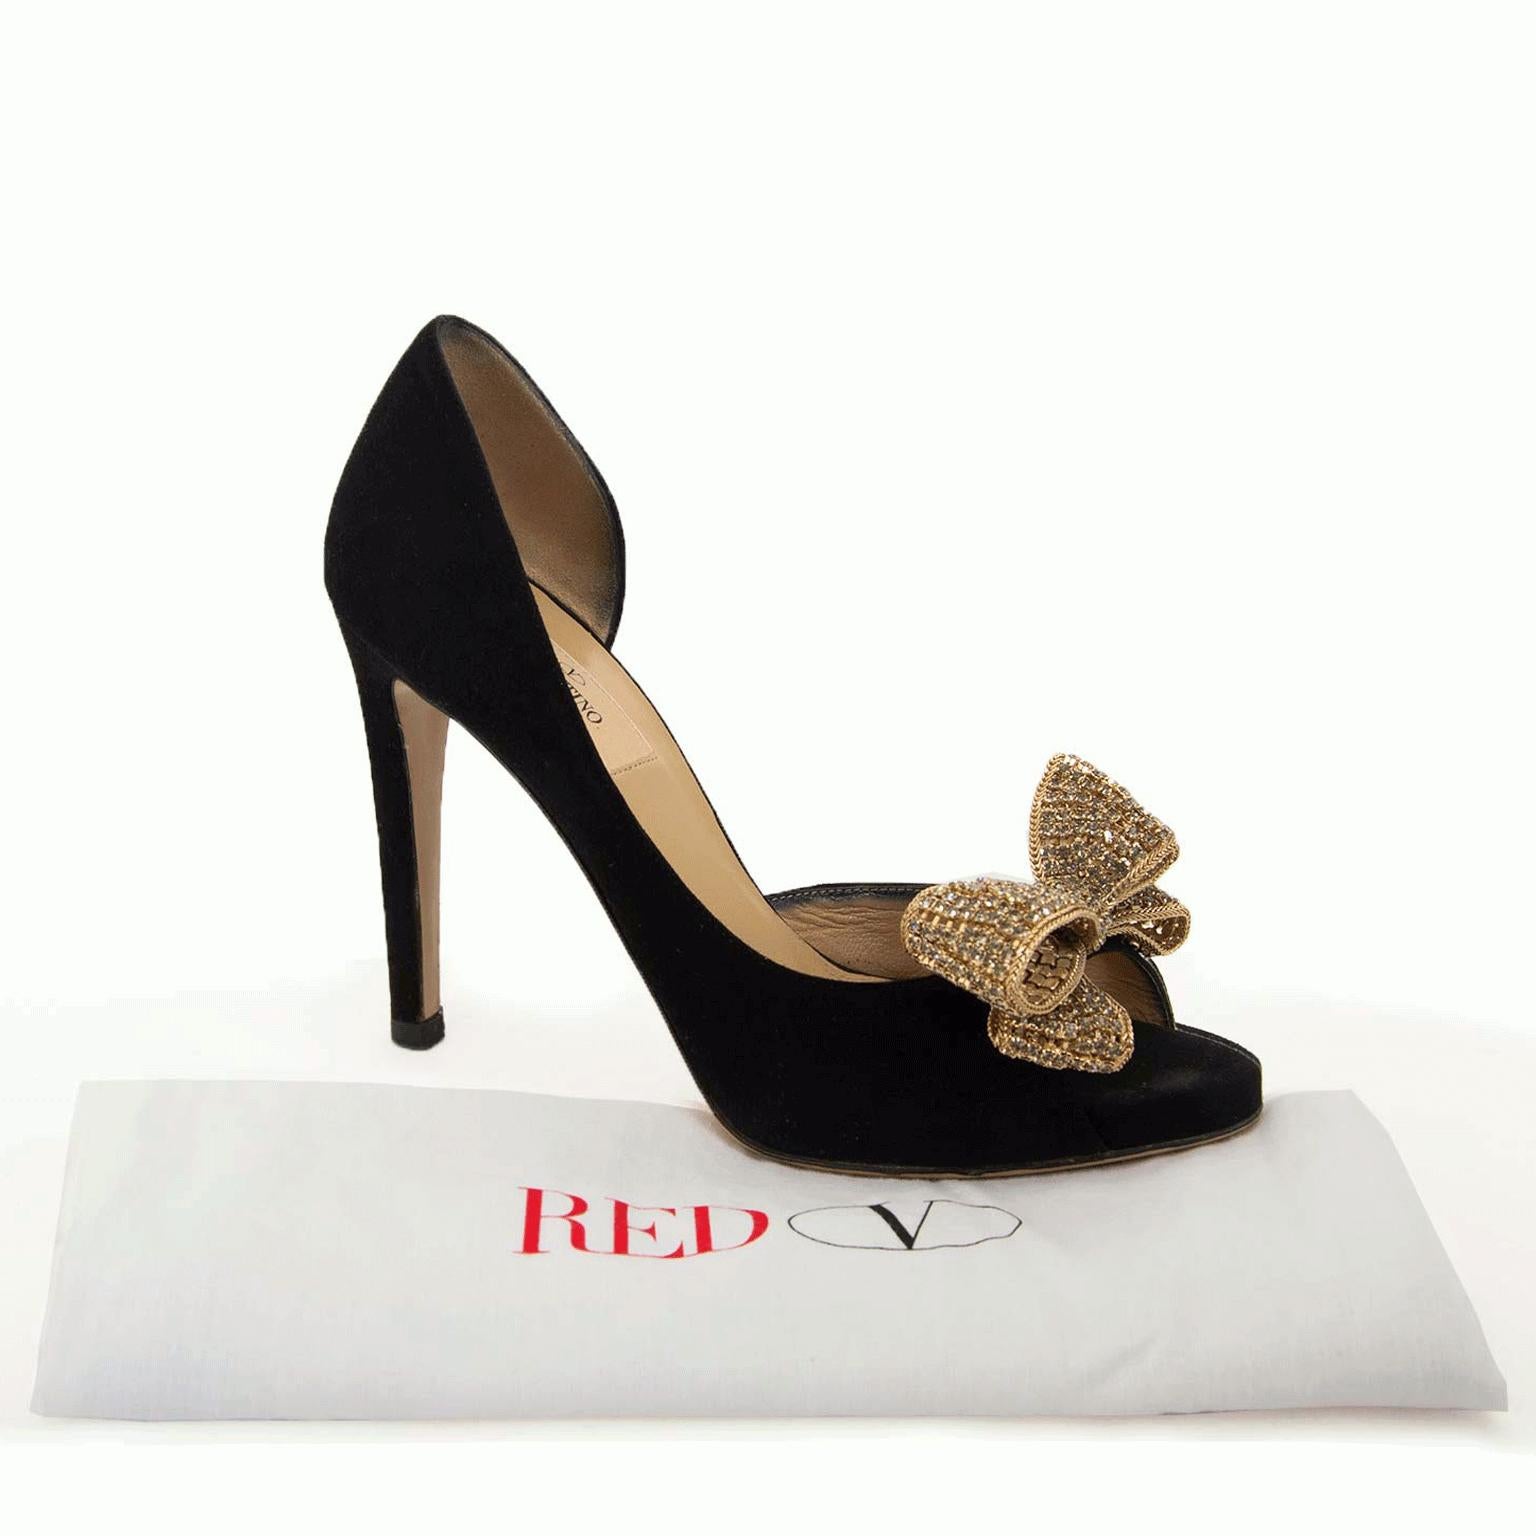 Very good condition

Valentino Suede Jeweled Bow d'Orsay Pumps - Size 37.5

These incredibly stunning Valentino pumps are crafted in black suede and feature a bejeweled bow.
They are open on one side and have a peep-toe.
These beauties will be